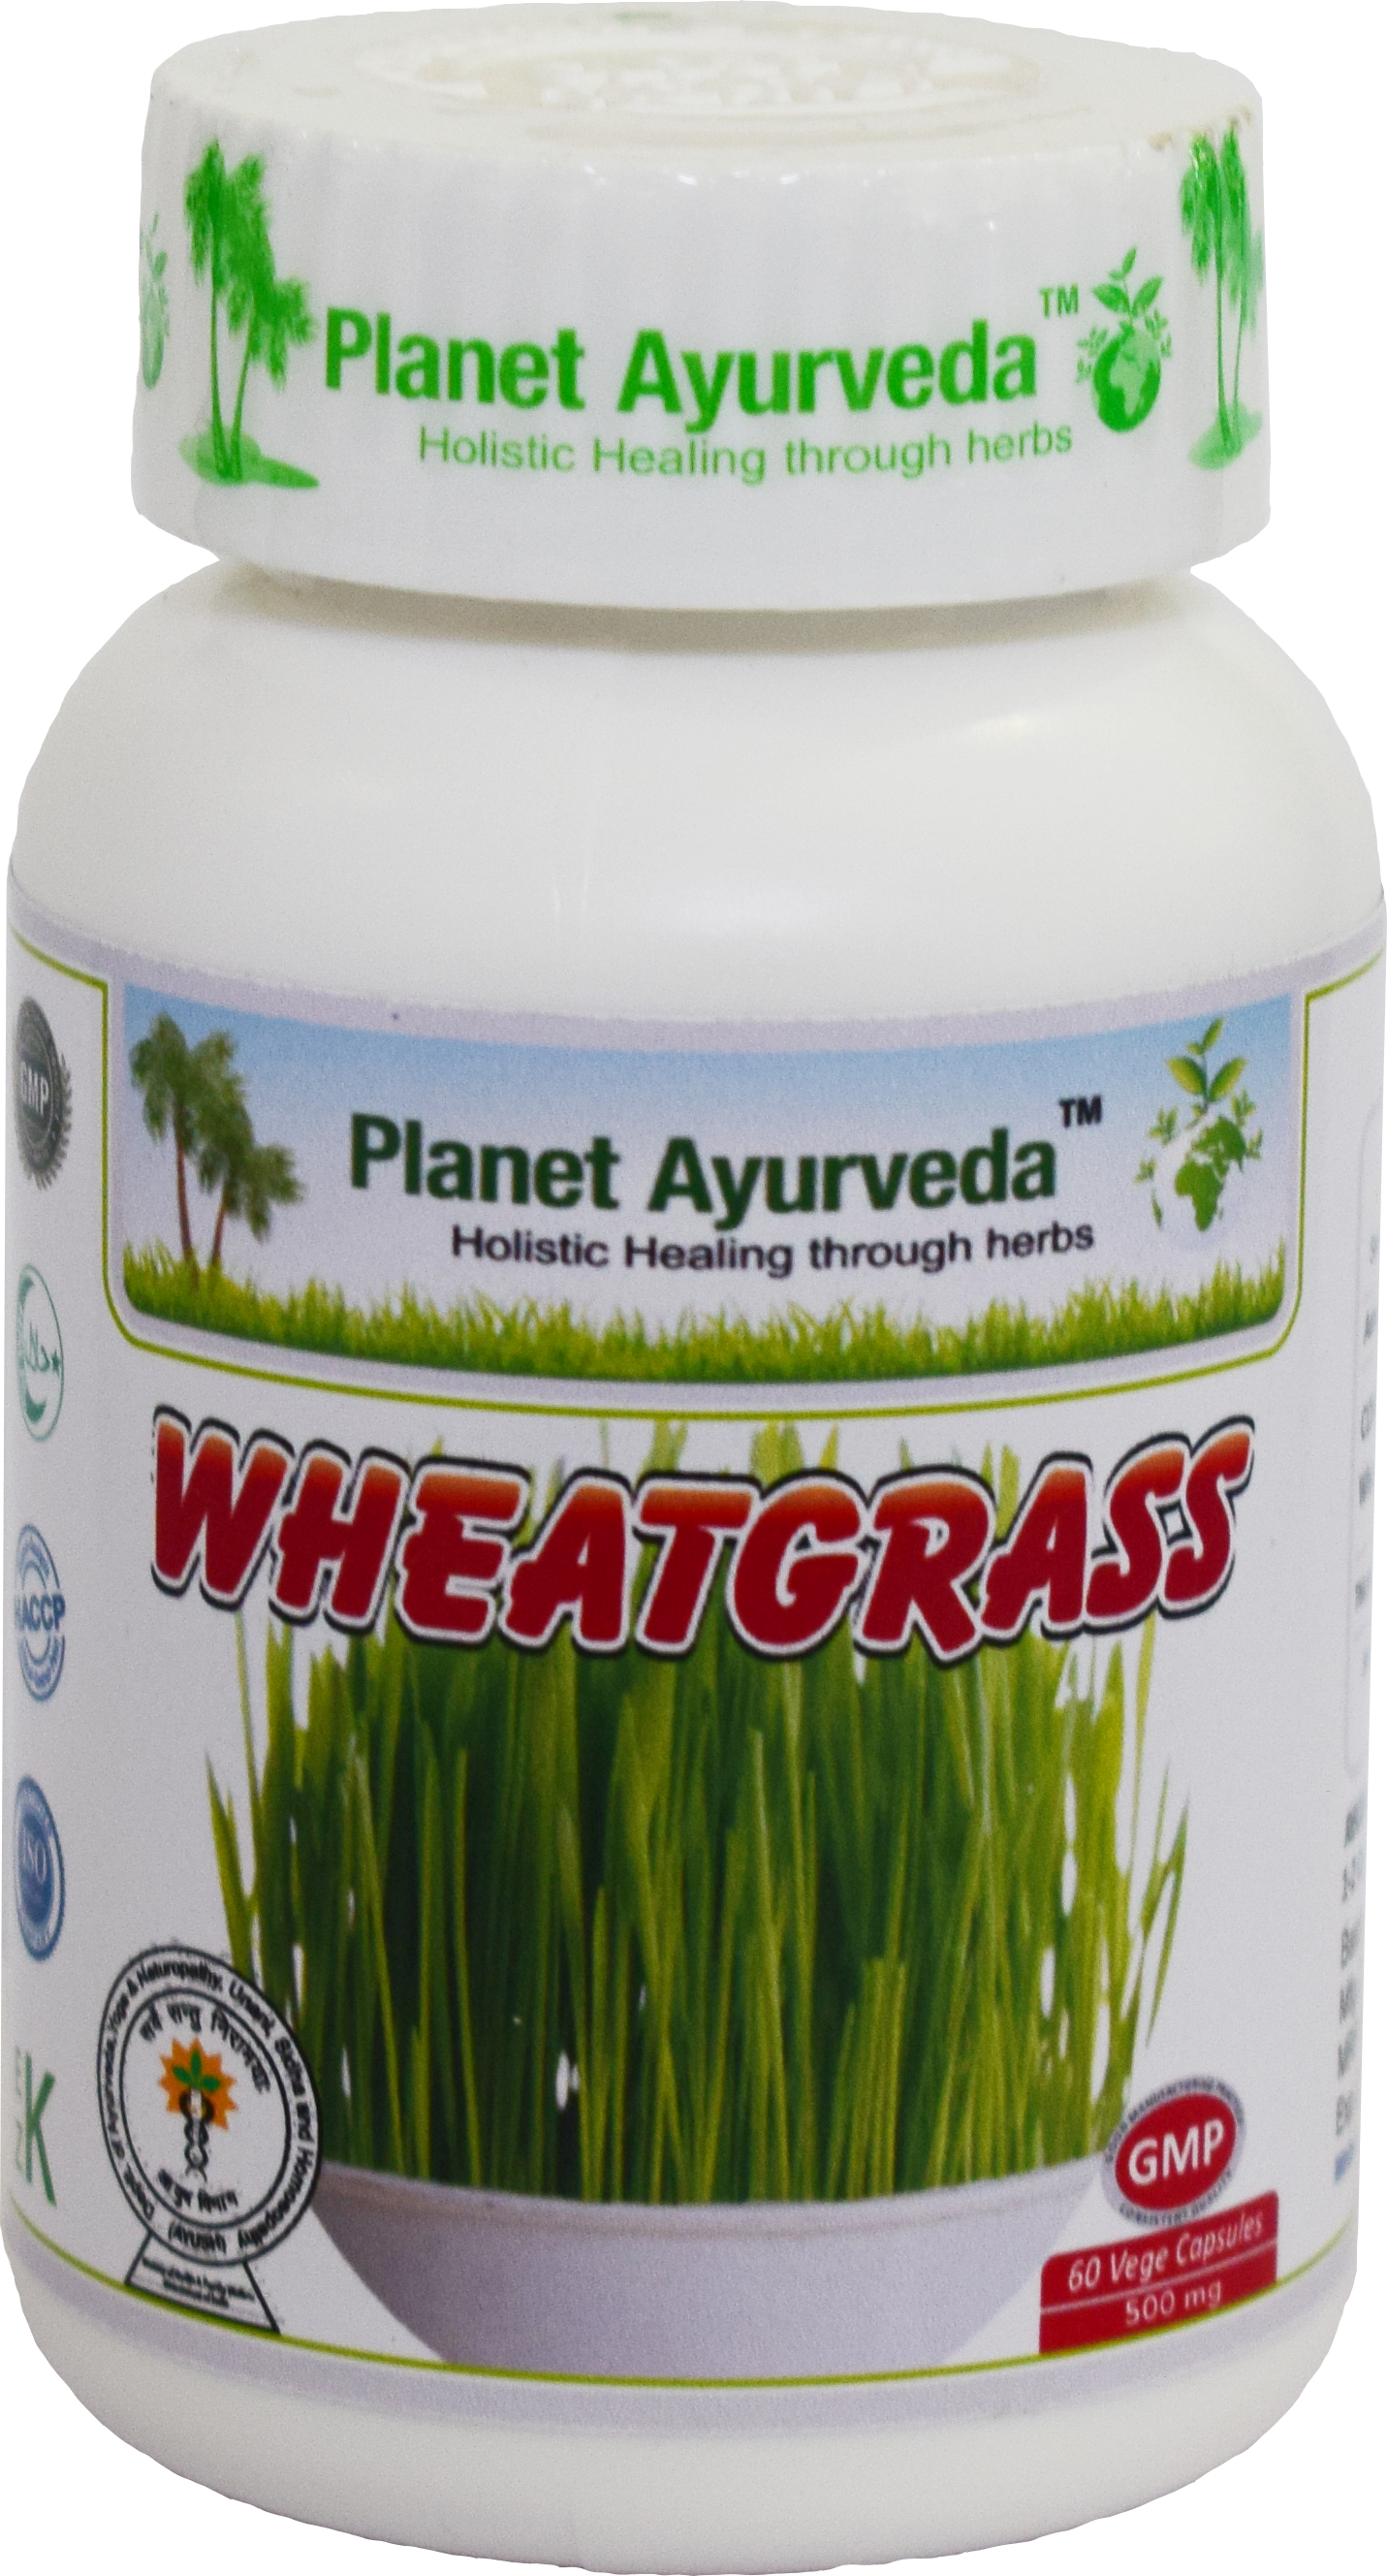 Buy Planet Ayurveda Wheatgrass Capsules at Best Price Online